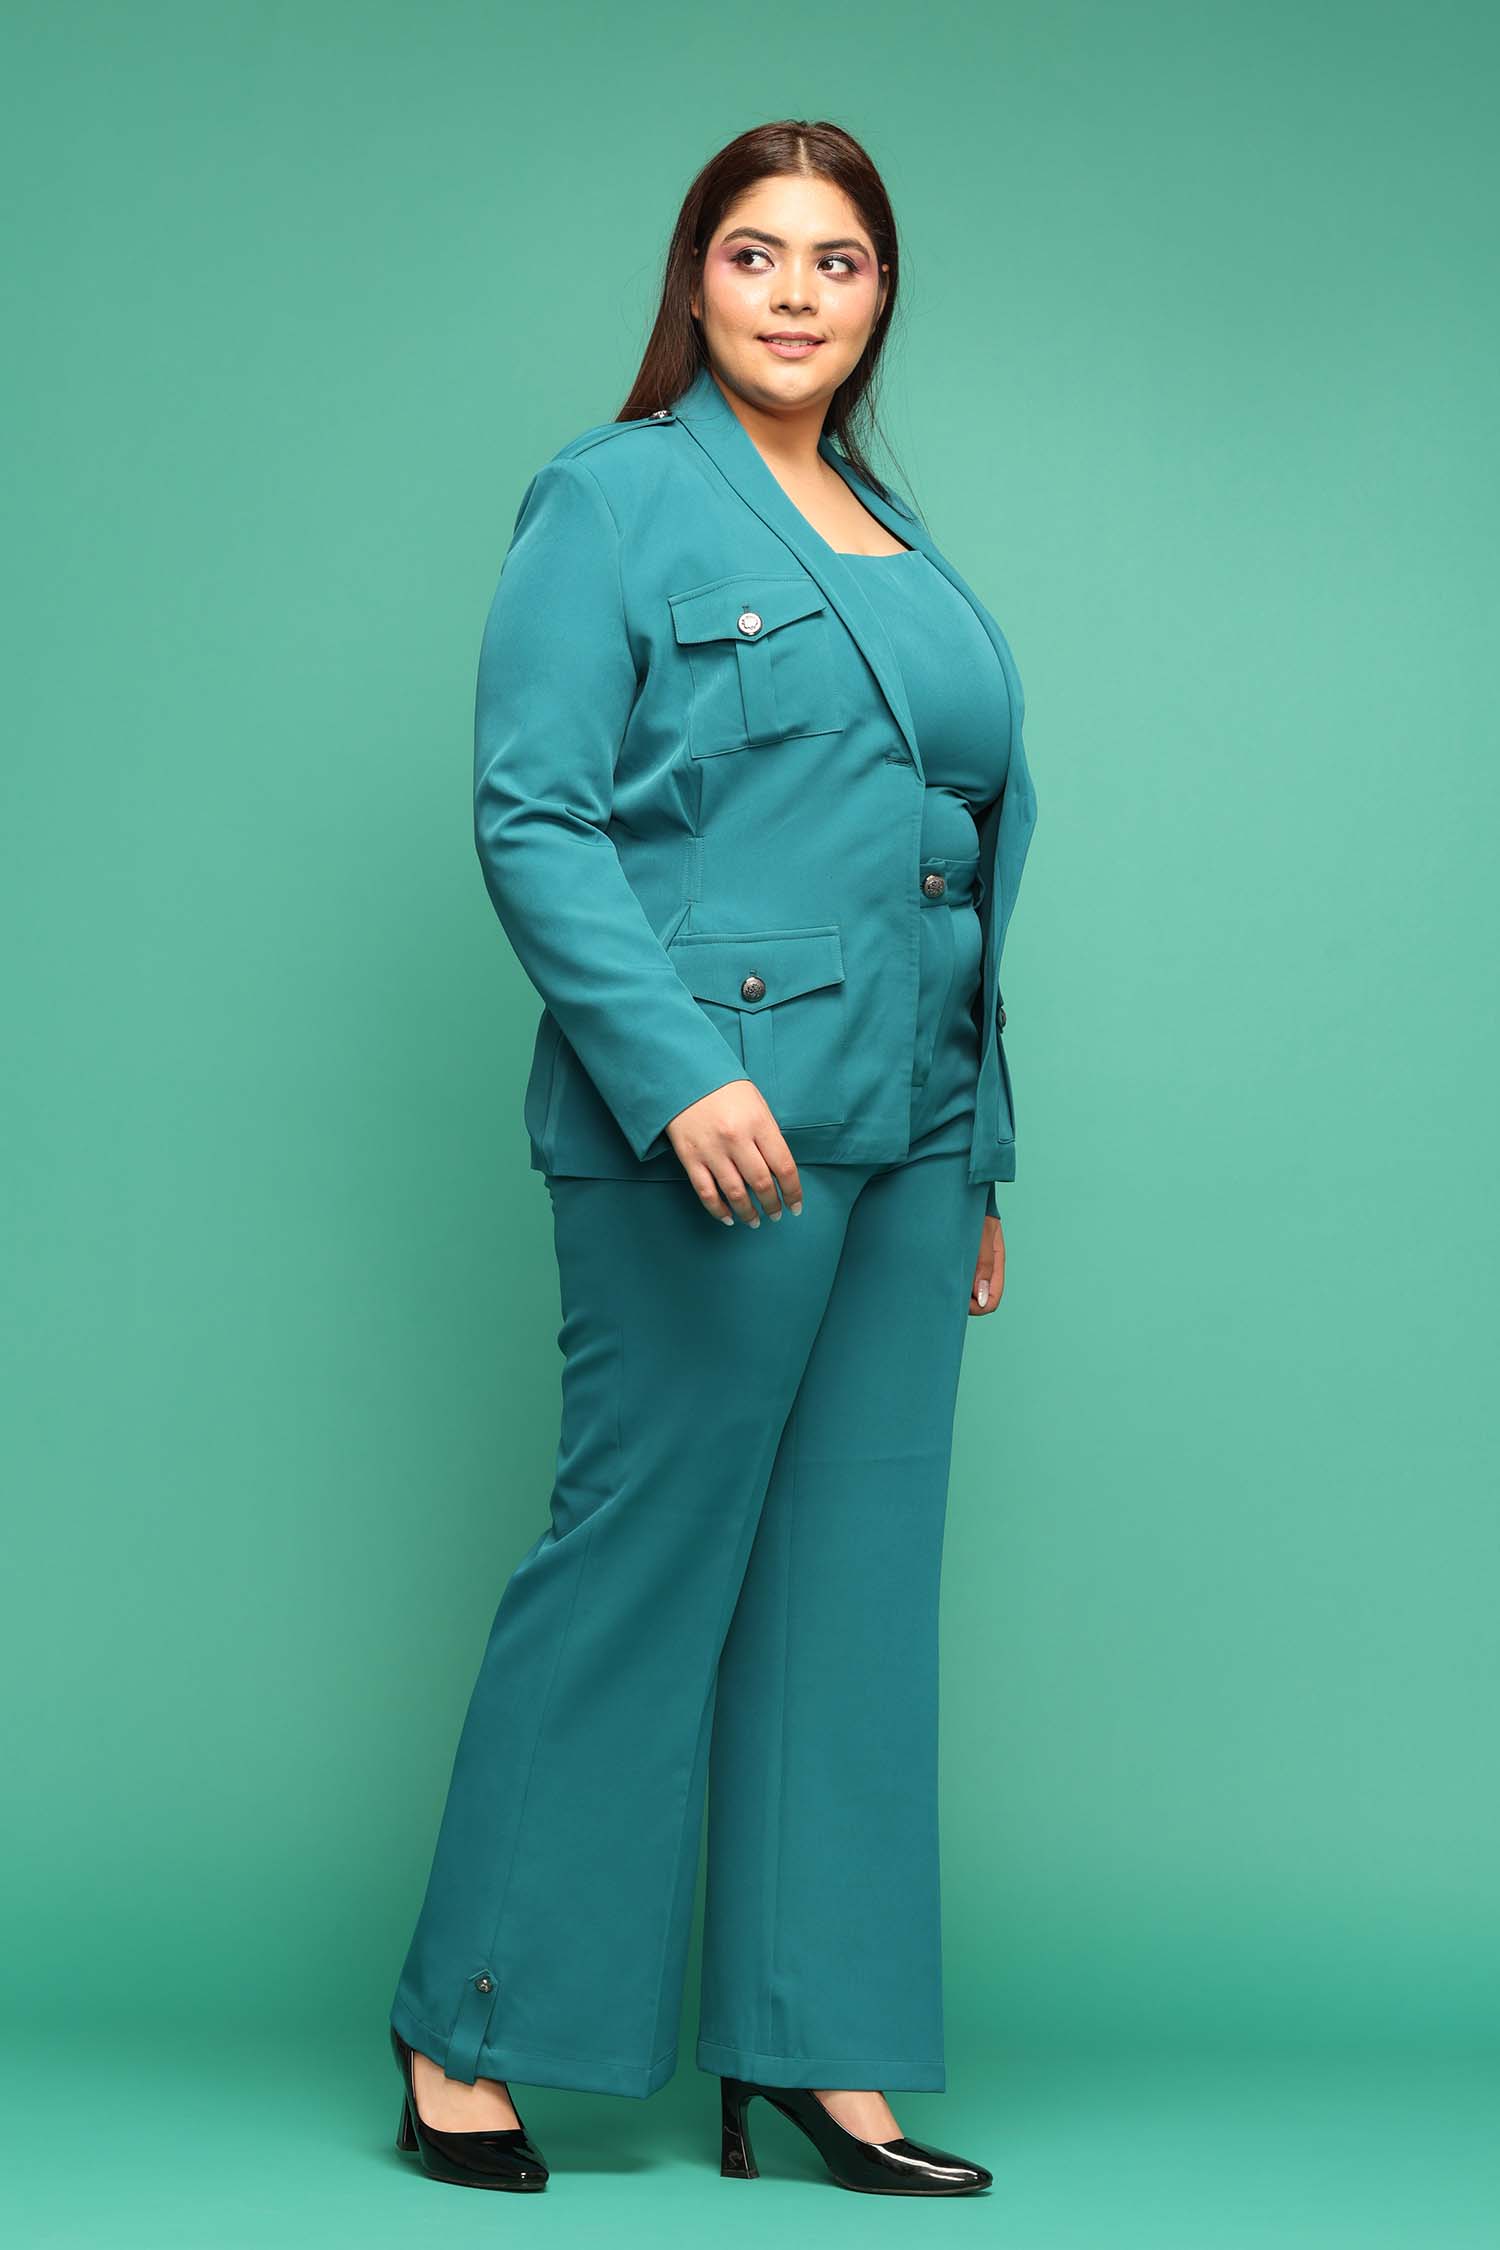 Box Pleated Teal Blue Blazer With Trousers